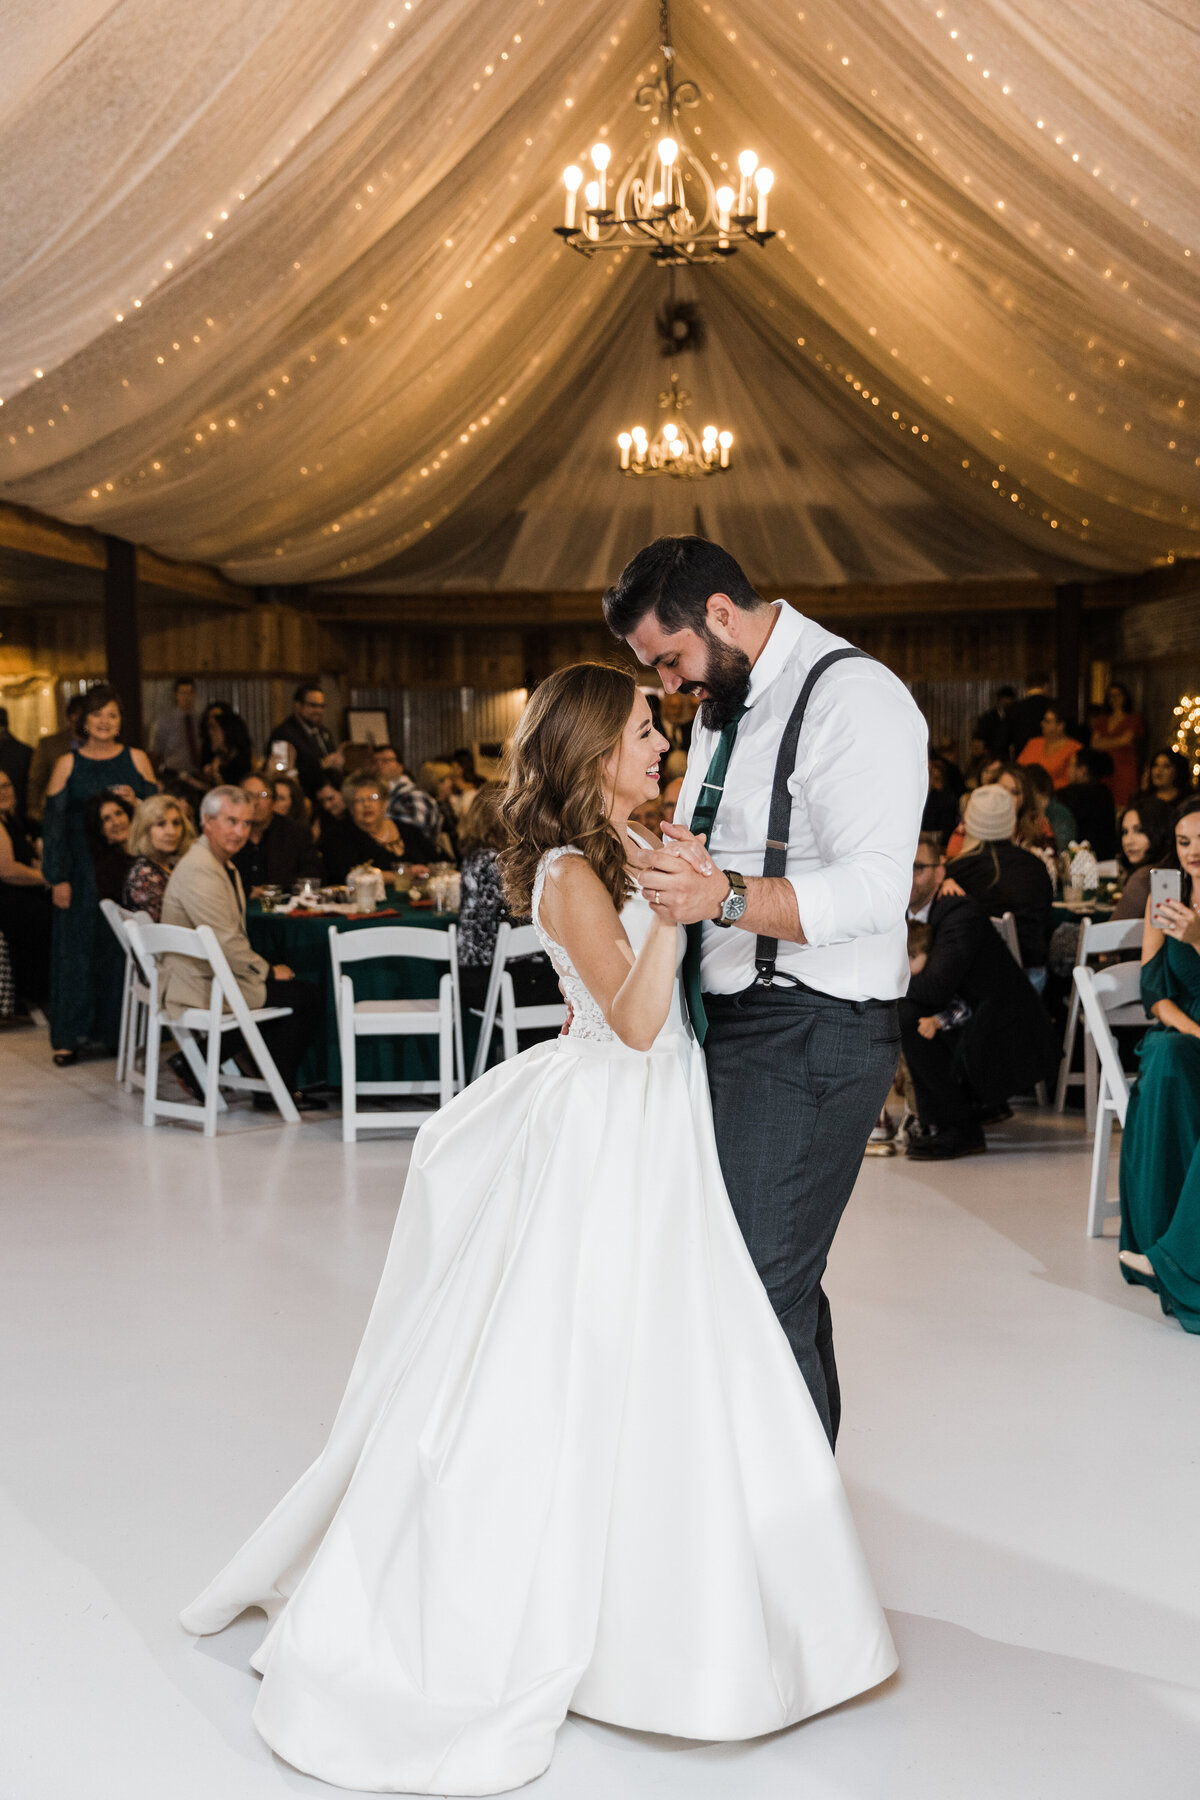 Candid shot of a couple sharing their first dance during their wedding reception in Abilene, Texas. The bride is on the left and is wearing a sleeveless, white dress. The groom is on the left and is wearing a suit (minus the jacket) with a green tie and suspenders. Chandeliers, strings of lights, and flowing draperies hang overhead while many guests can sit in the background at their reception tables.